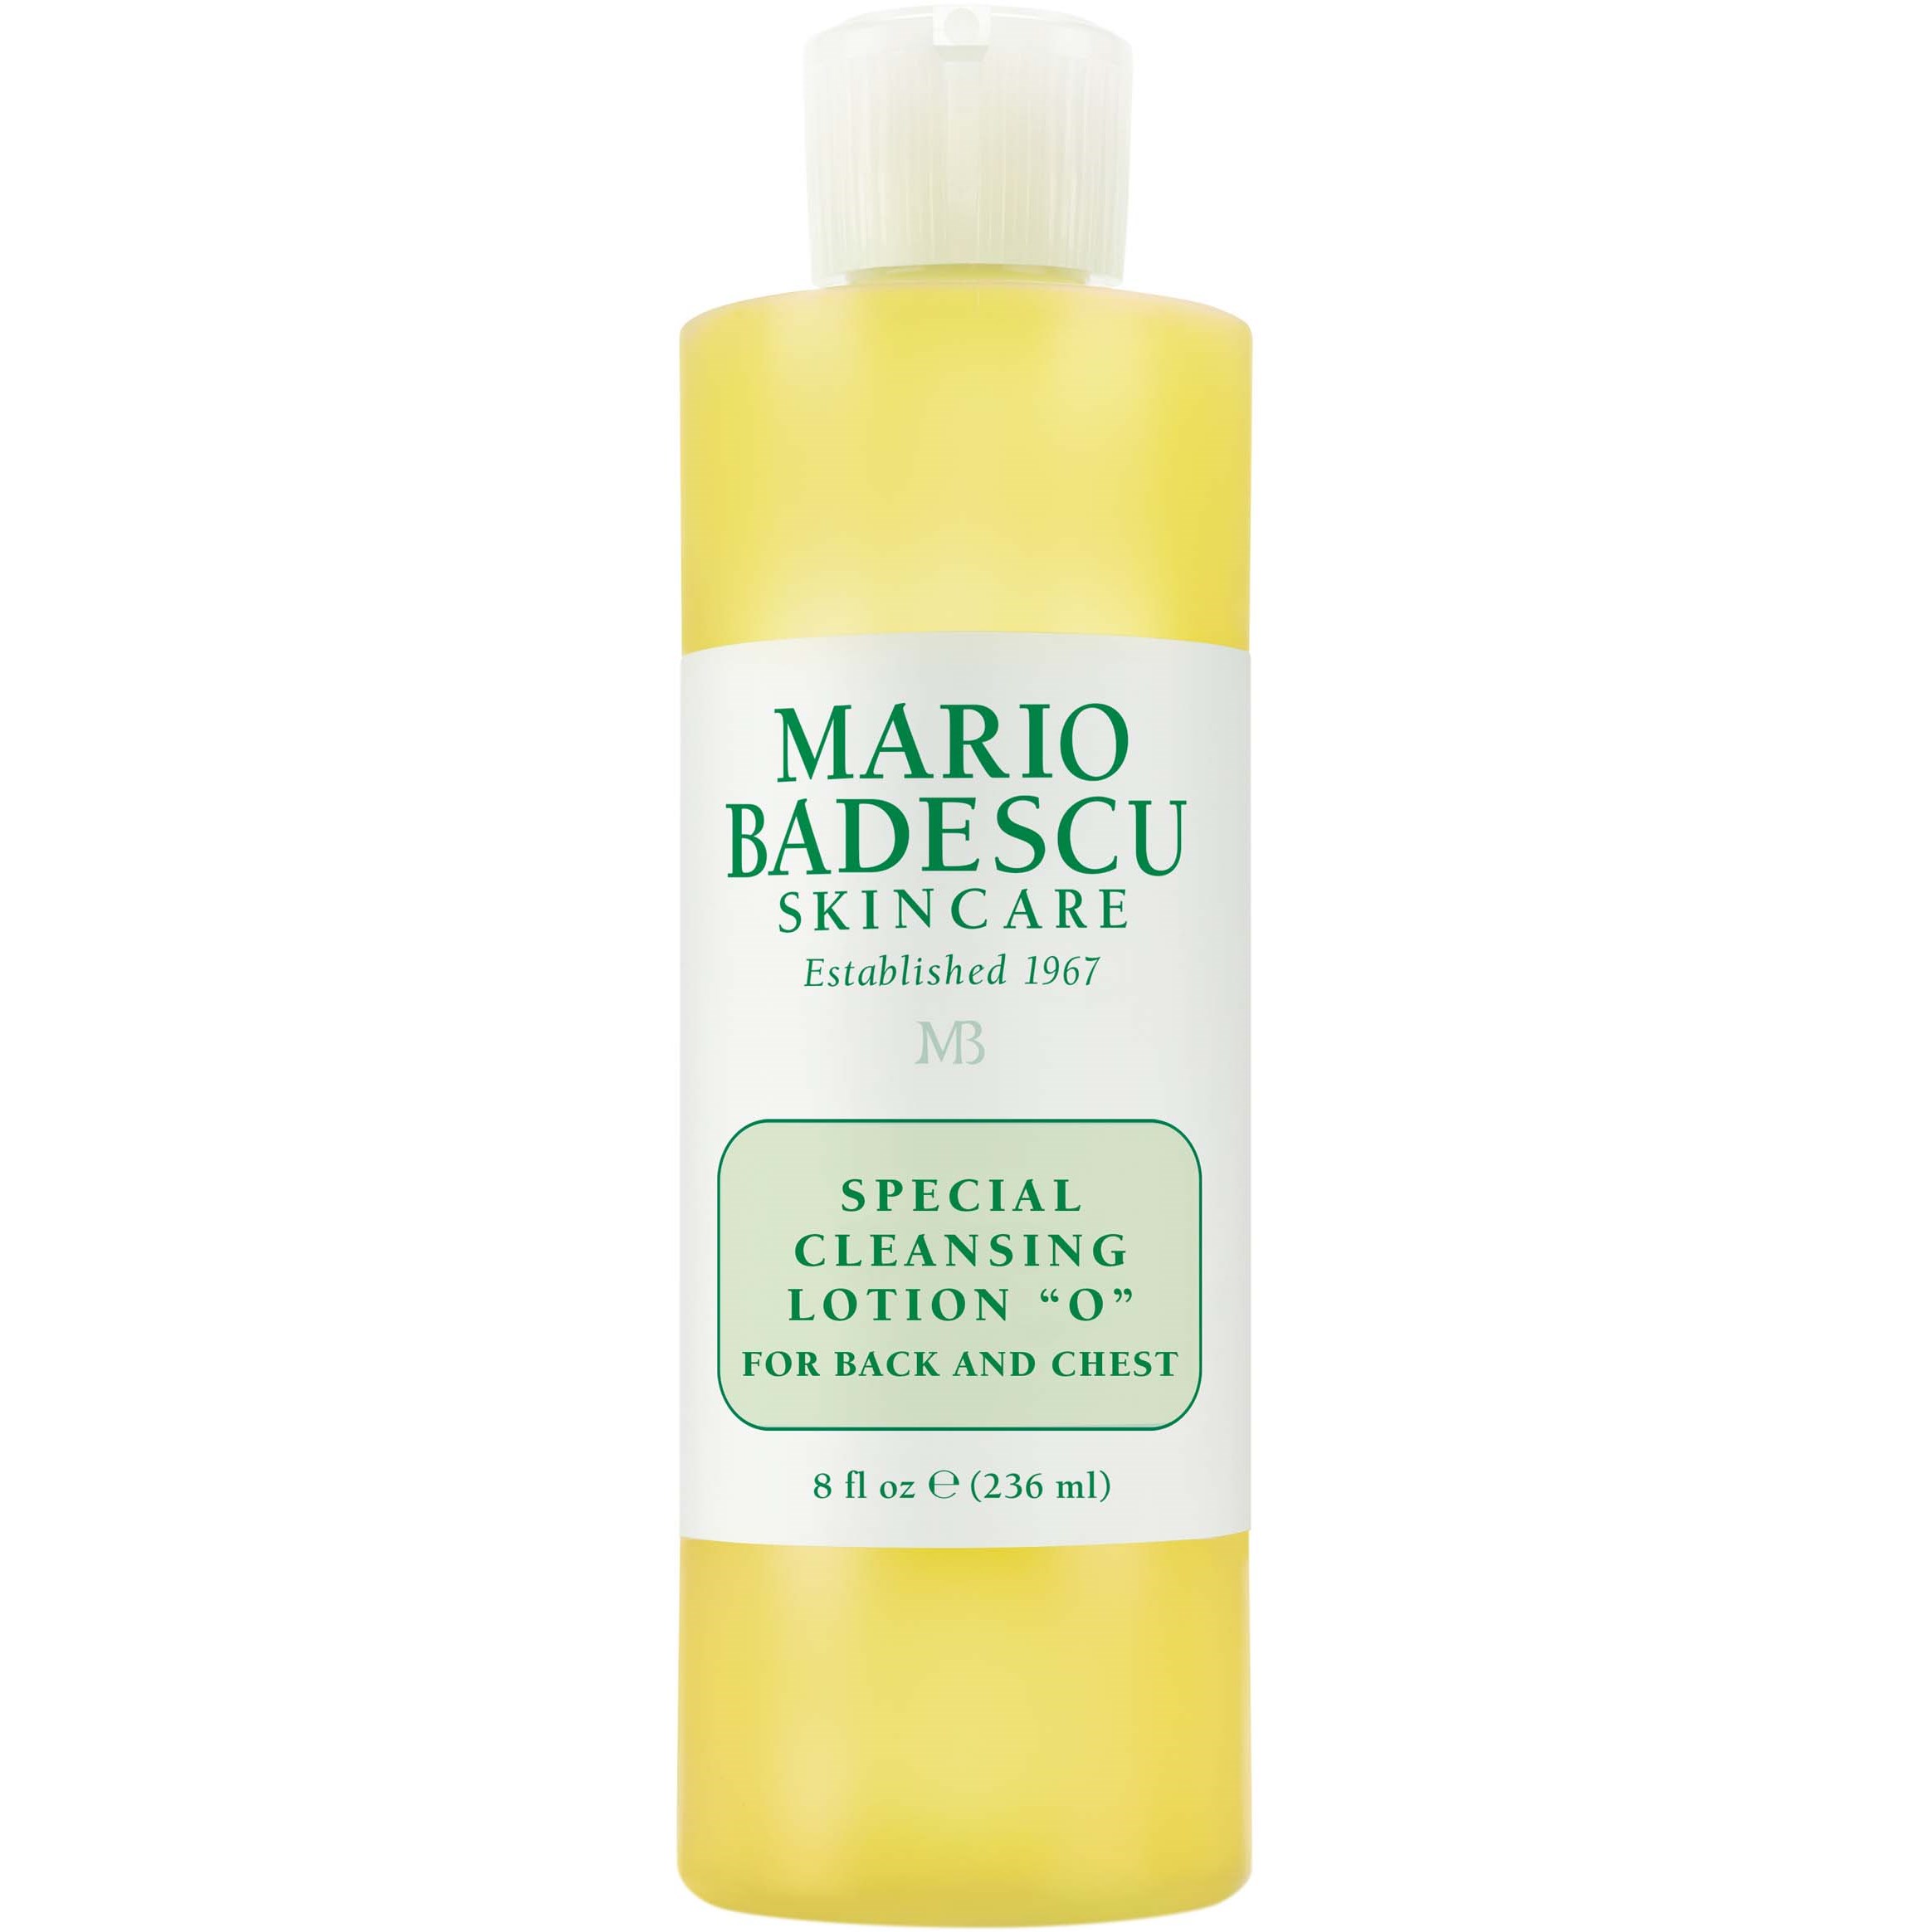 Mario Badescu Special Cleansing Lotion 